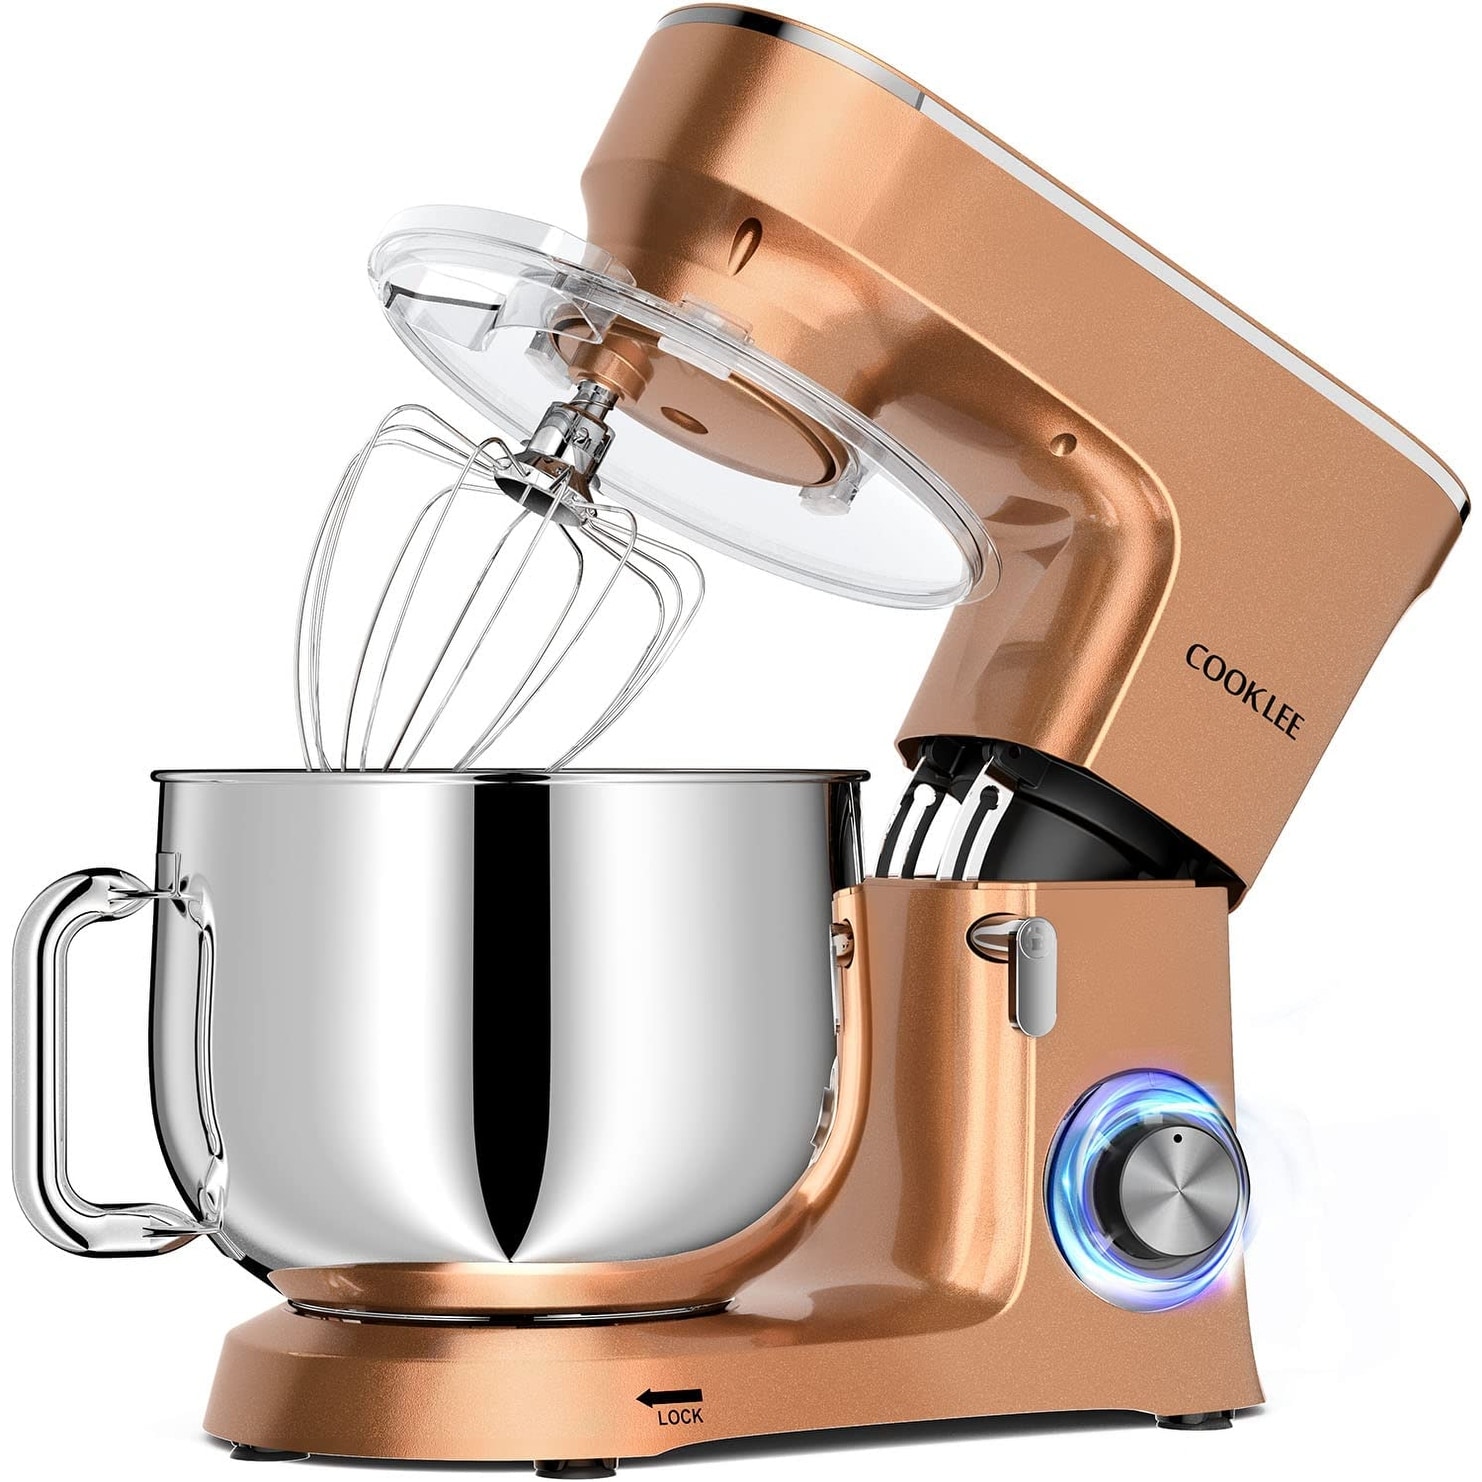 https://ak1.ostkcdn.com/images/products/is/images/direct/4142ff29a8c0f29d86a8d0c00f3fa27df649ede4/Stand-Mixer%2C-9.5-Qt.-660W-10-Speed-Electric-Kitchen-Mixer-with-Dishwasher-Safe-Dough-Hooks%2C-Flat-Beaters.jpg